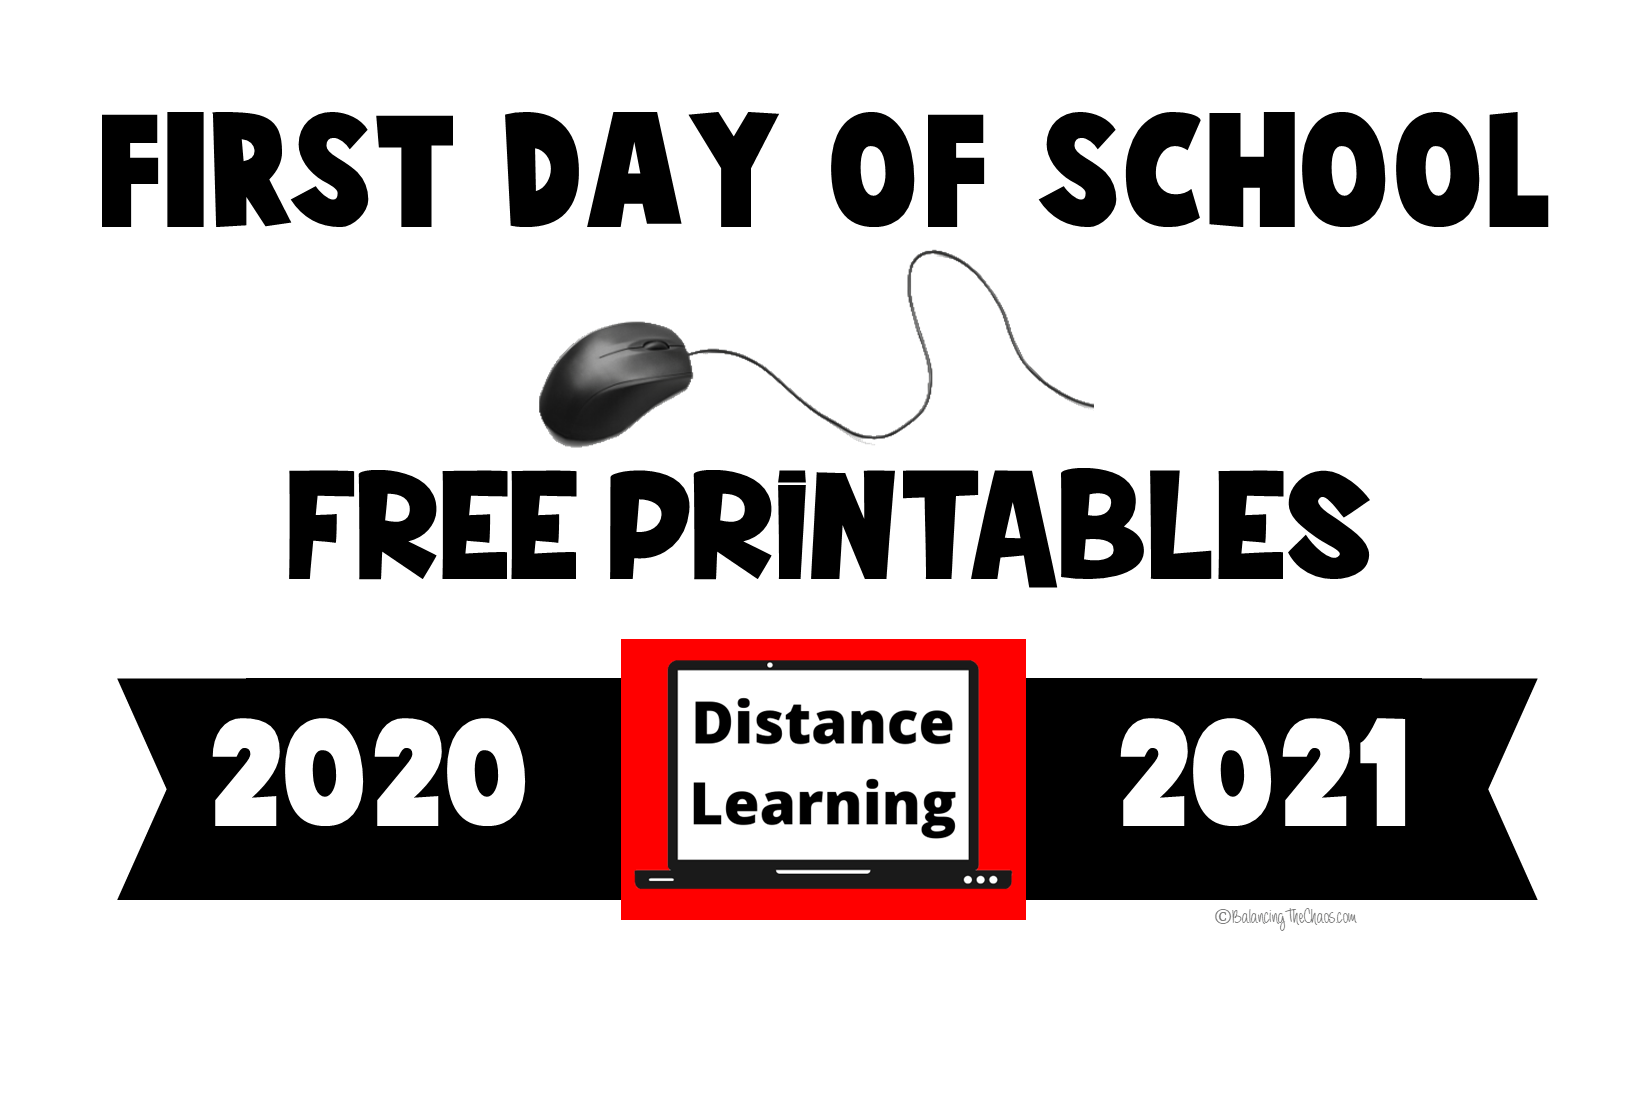 FREE PRINTABLES 2020 2021 First Day Of School Distance Learning